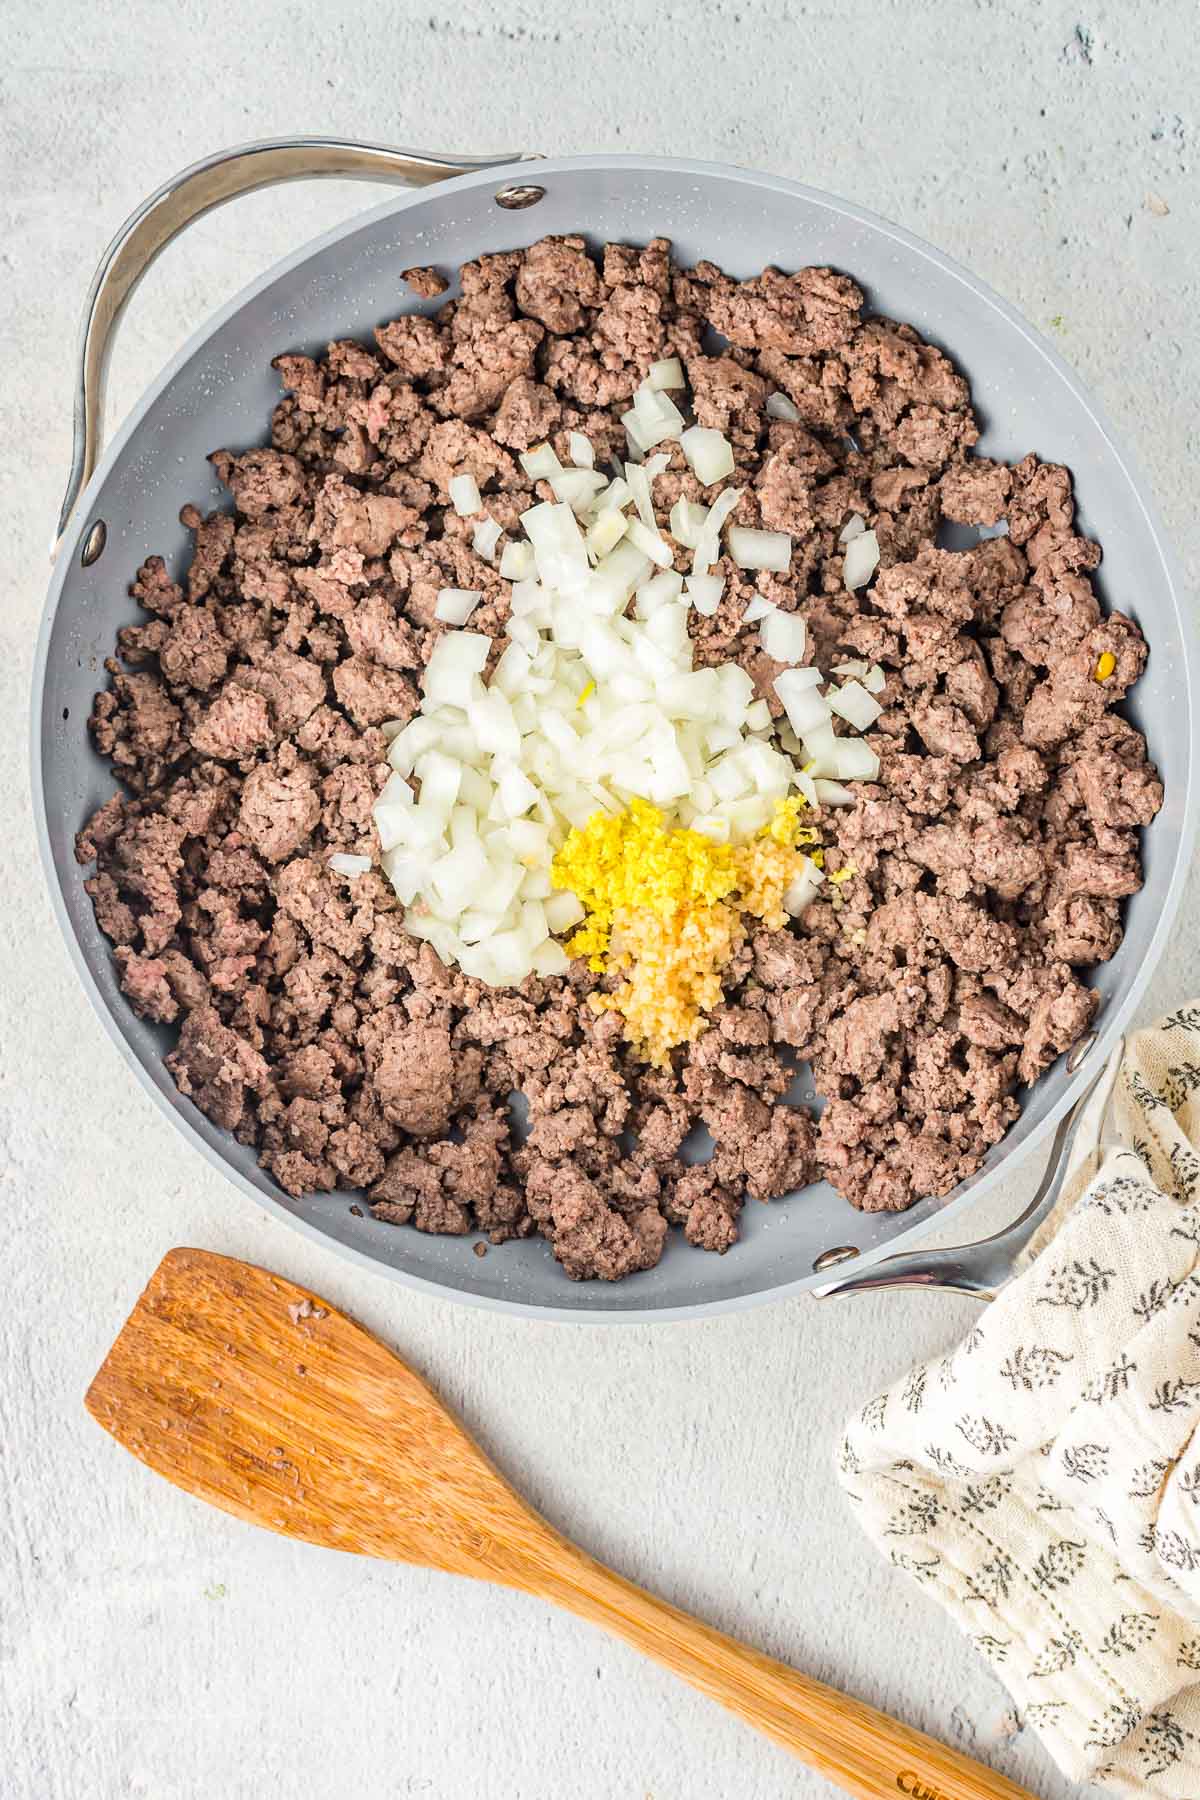 Cooked ground beef in a skillet with onion and garlic shown on top.